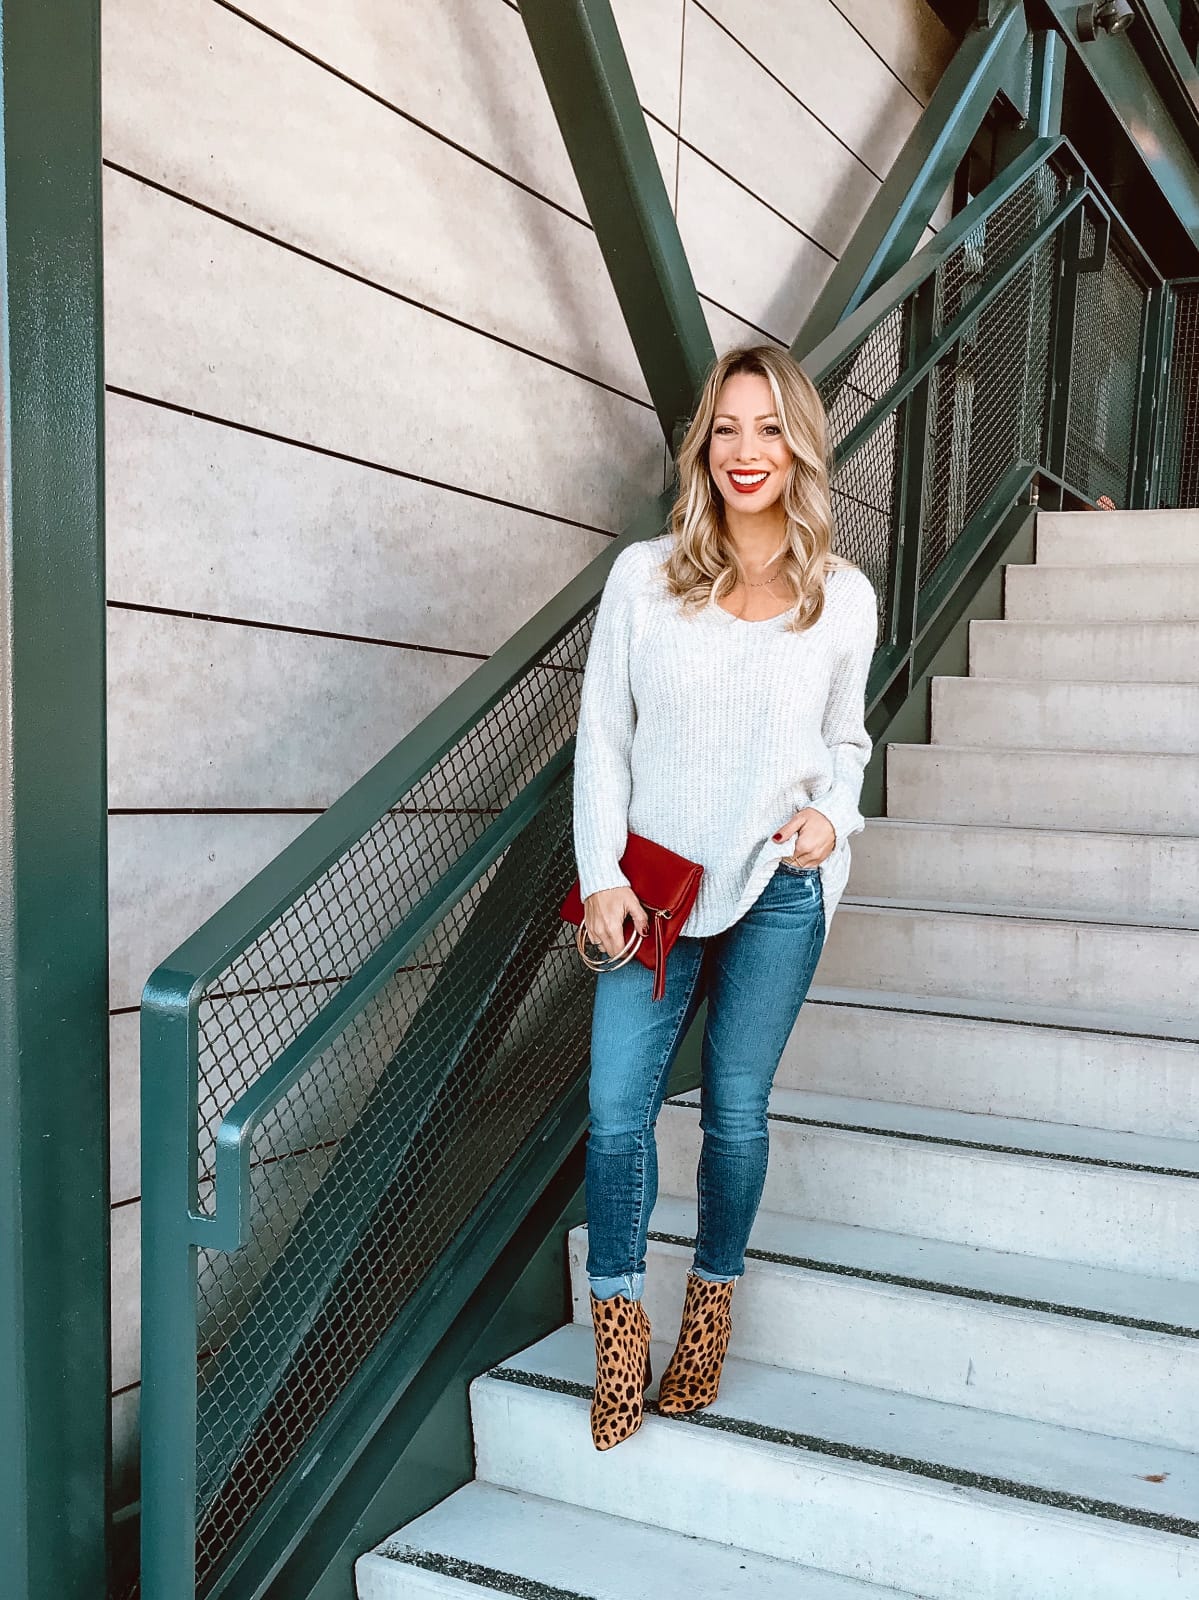 Cute winter outfit jeans sweater and leopard booties